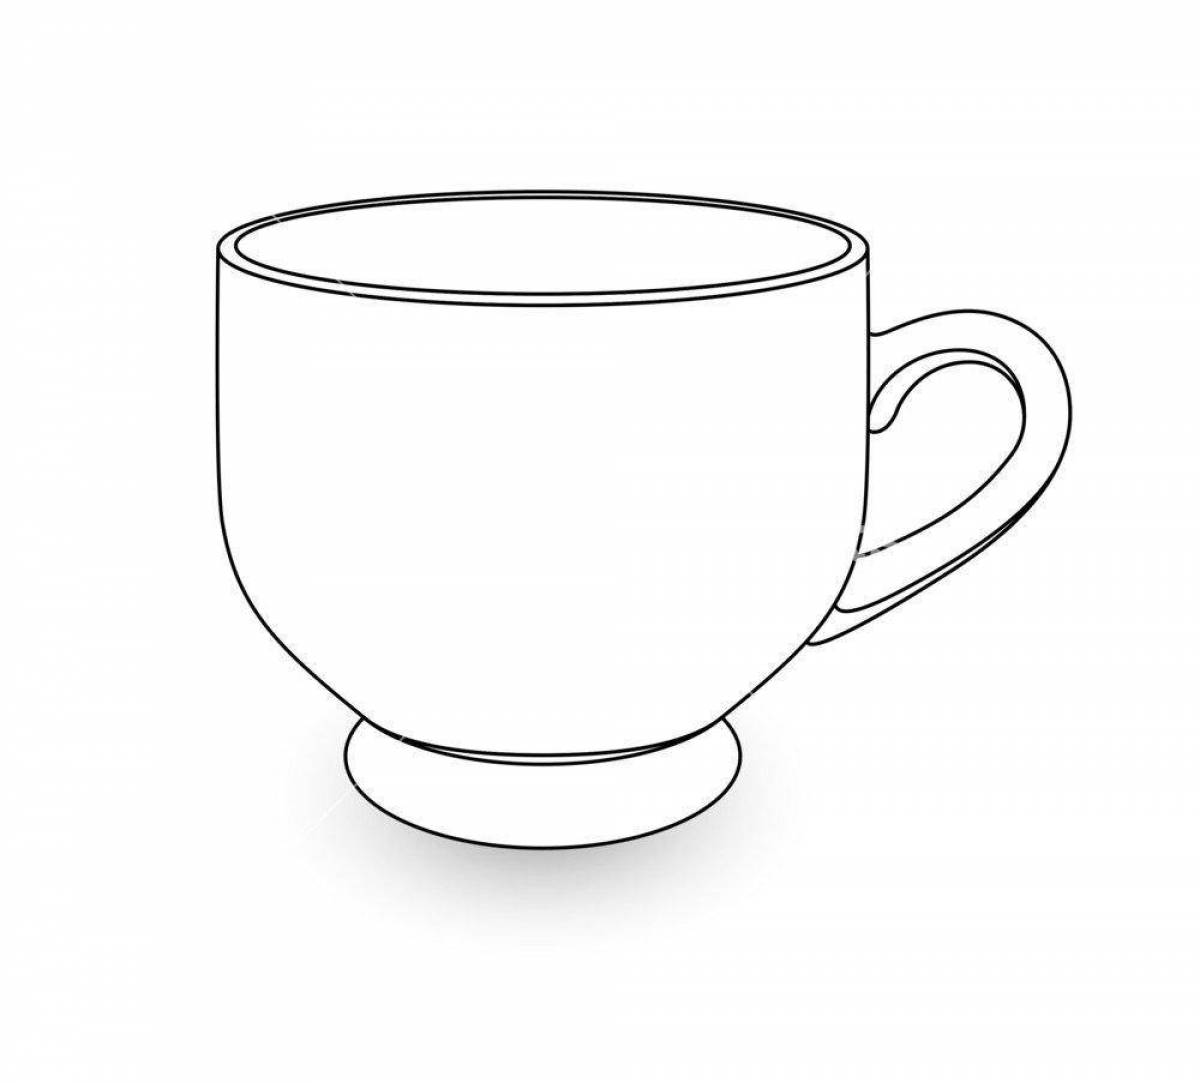 Coloring book inviting cup on a transparent background